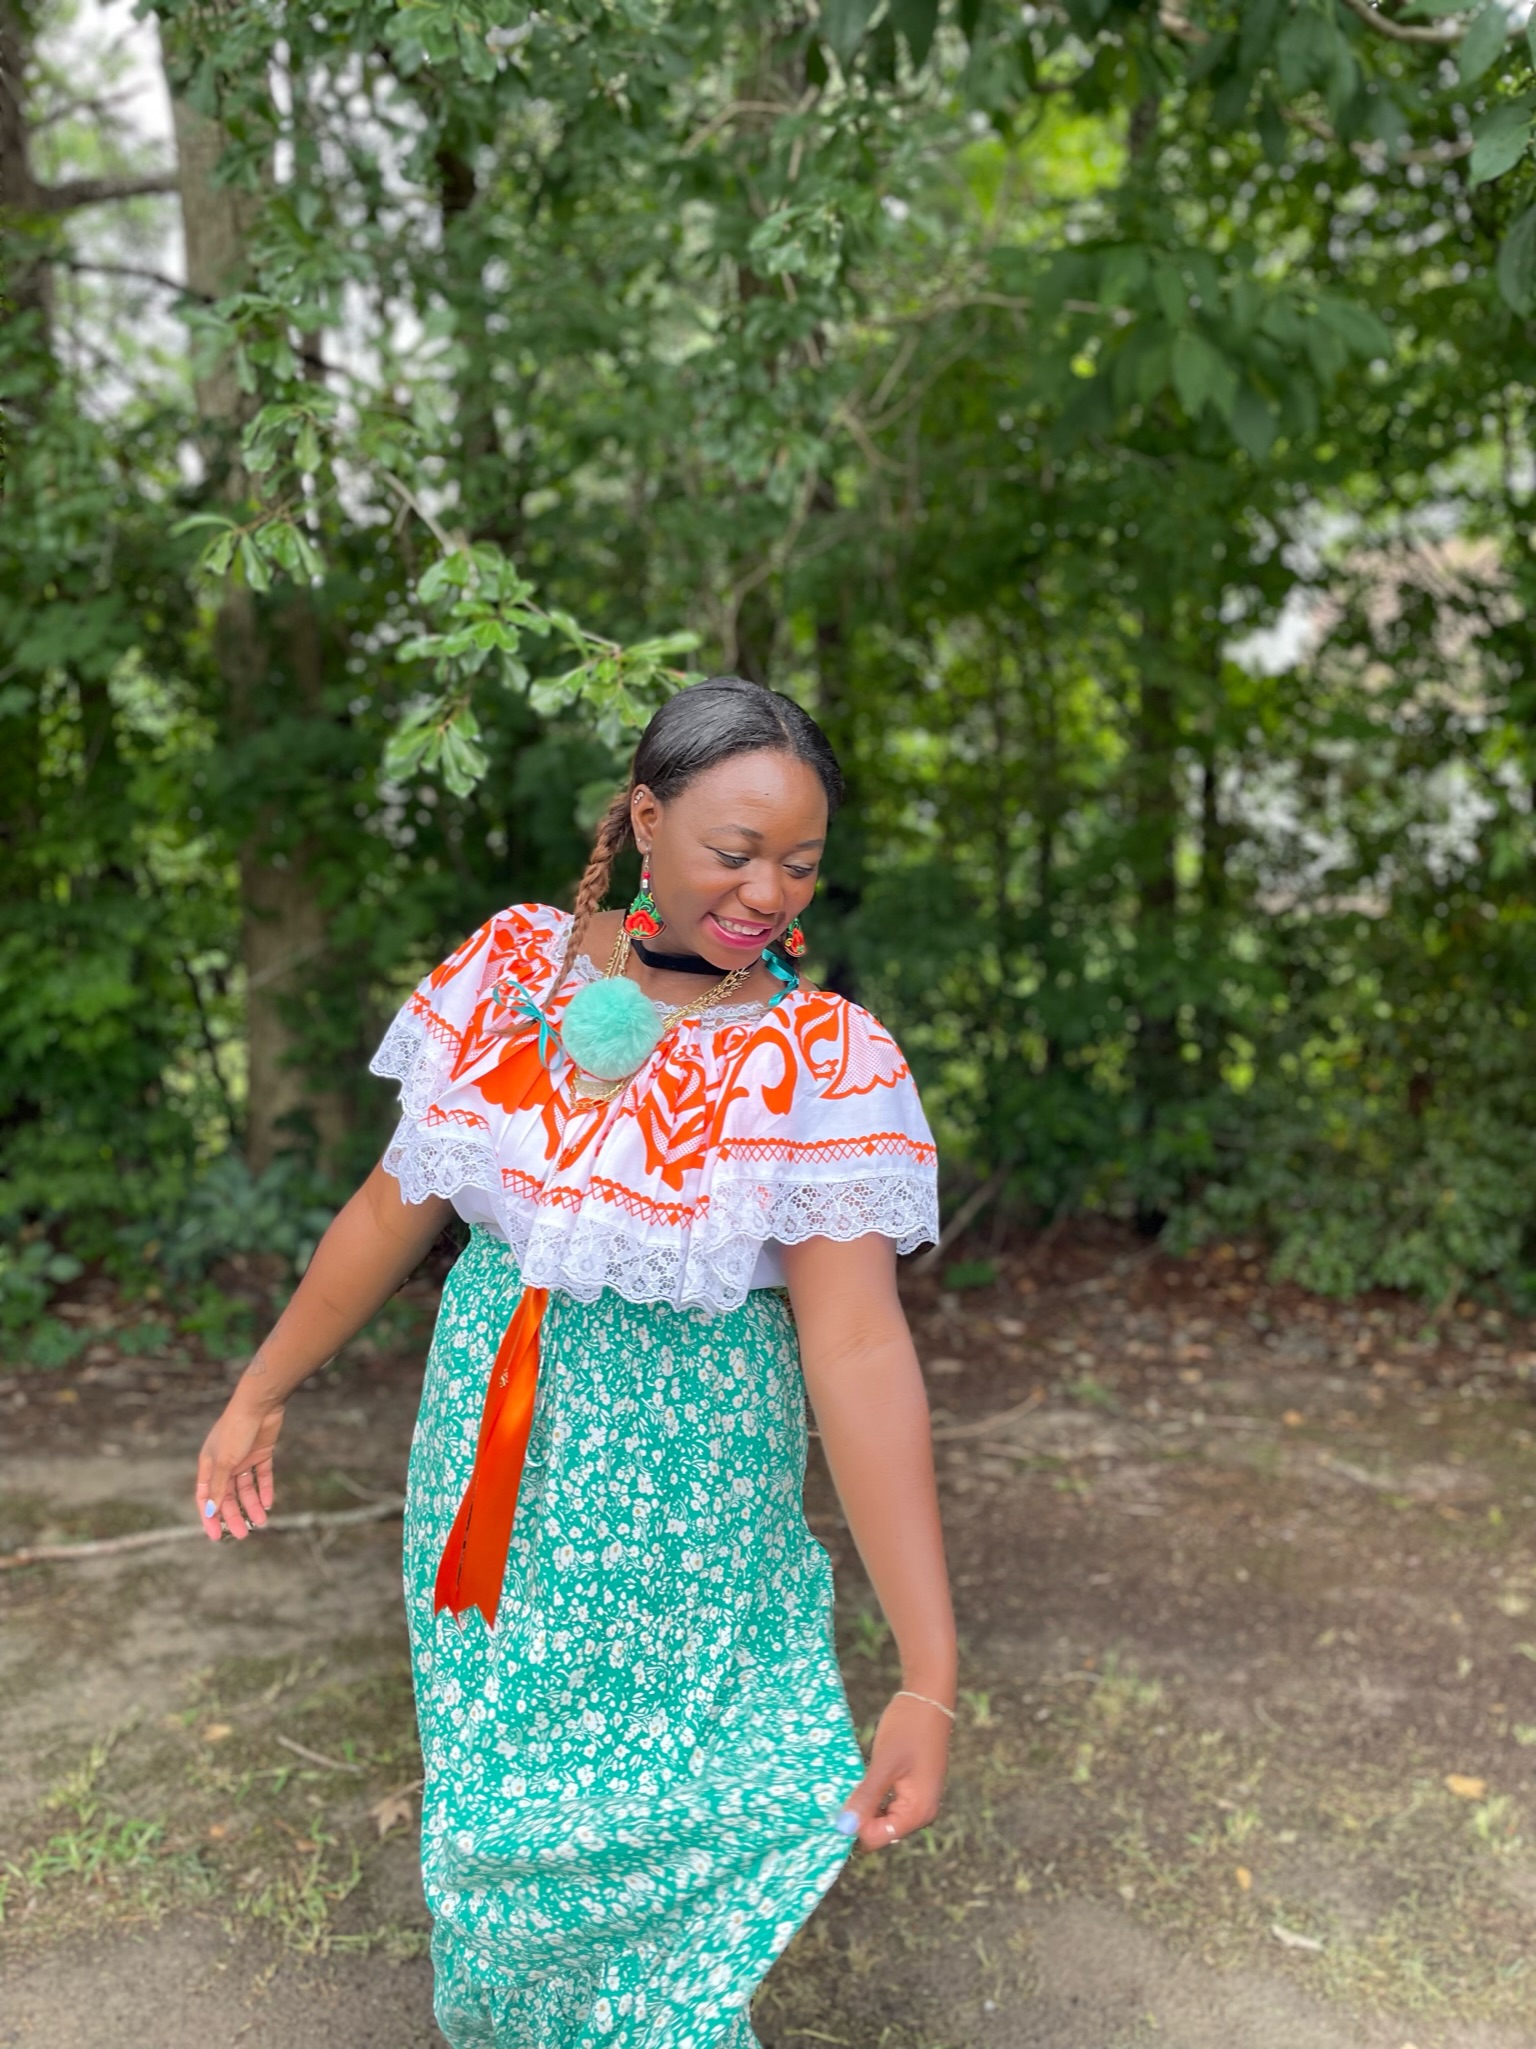  Shemariah Kentish is the daughter to Panamanian immigrants. She's pictured wearing a traditional pollera montuna dress. 